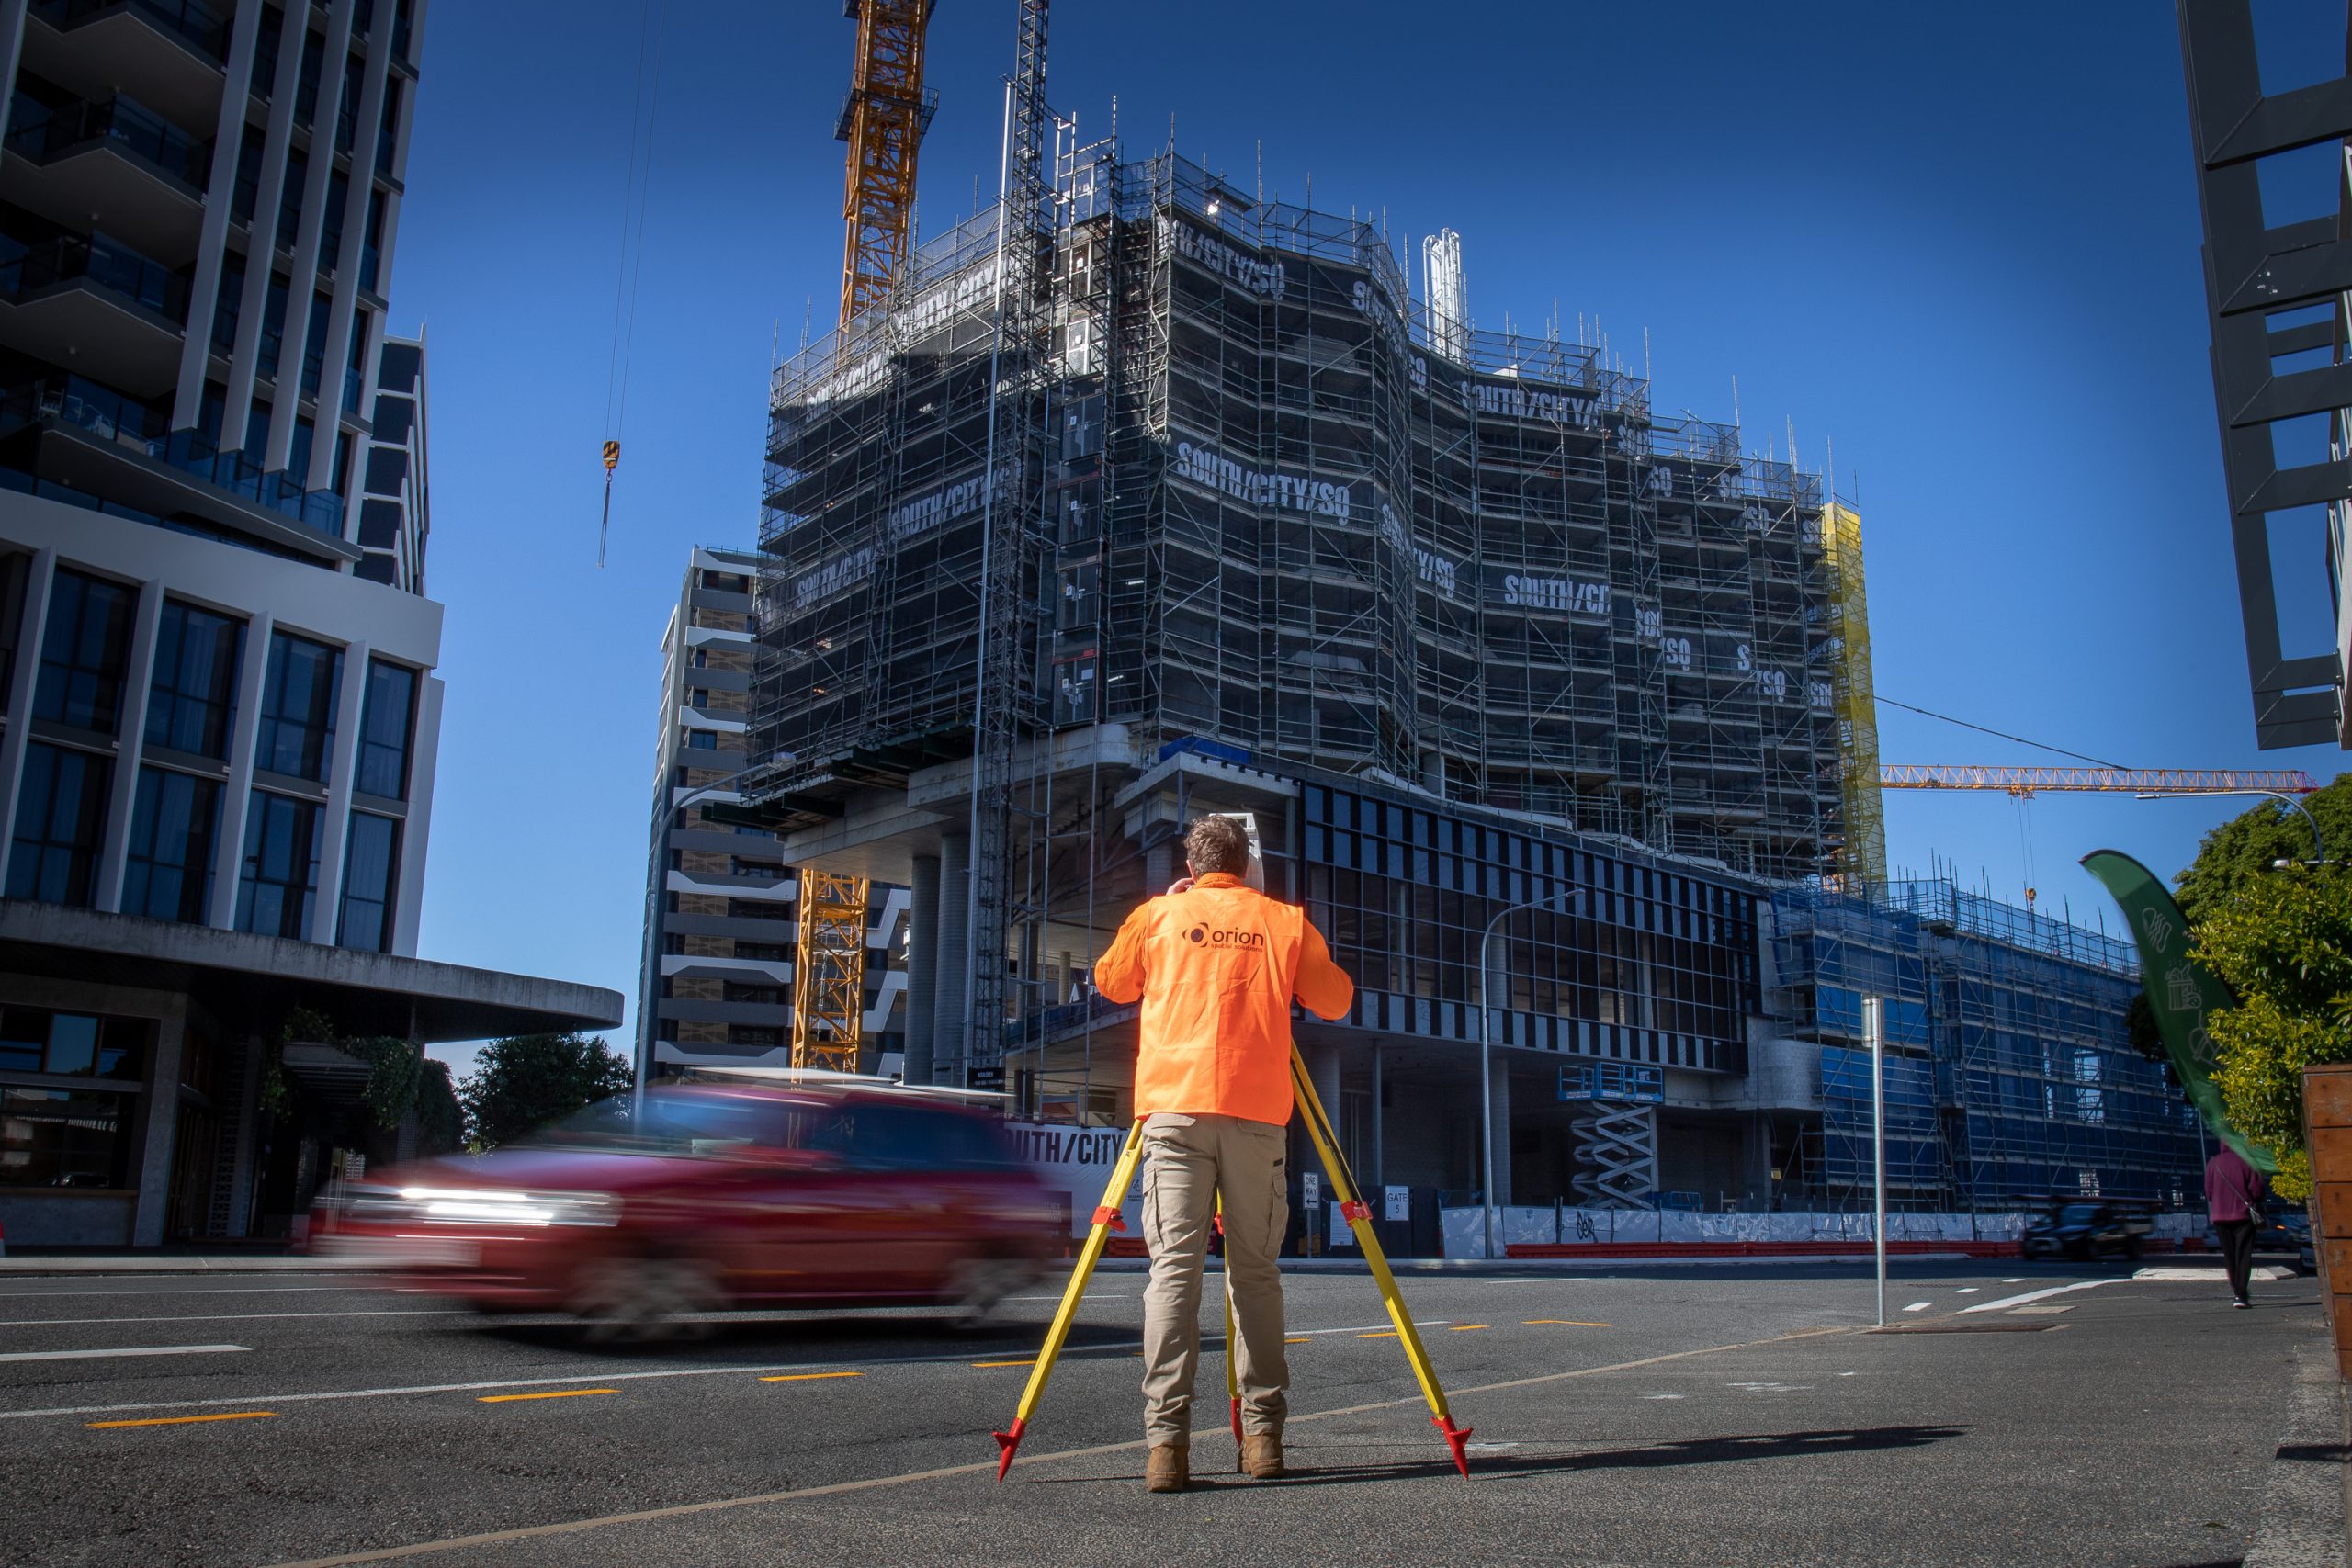 A surveyor in high vis orange looking towards a building under construction with a blurred car driving past.